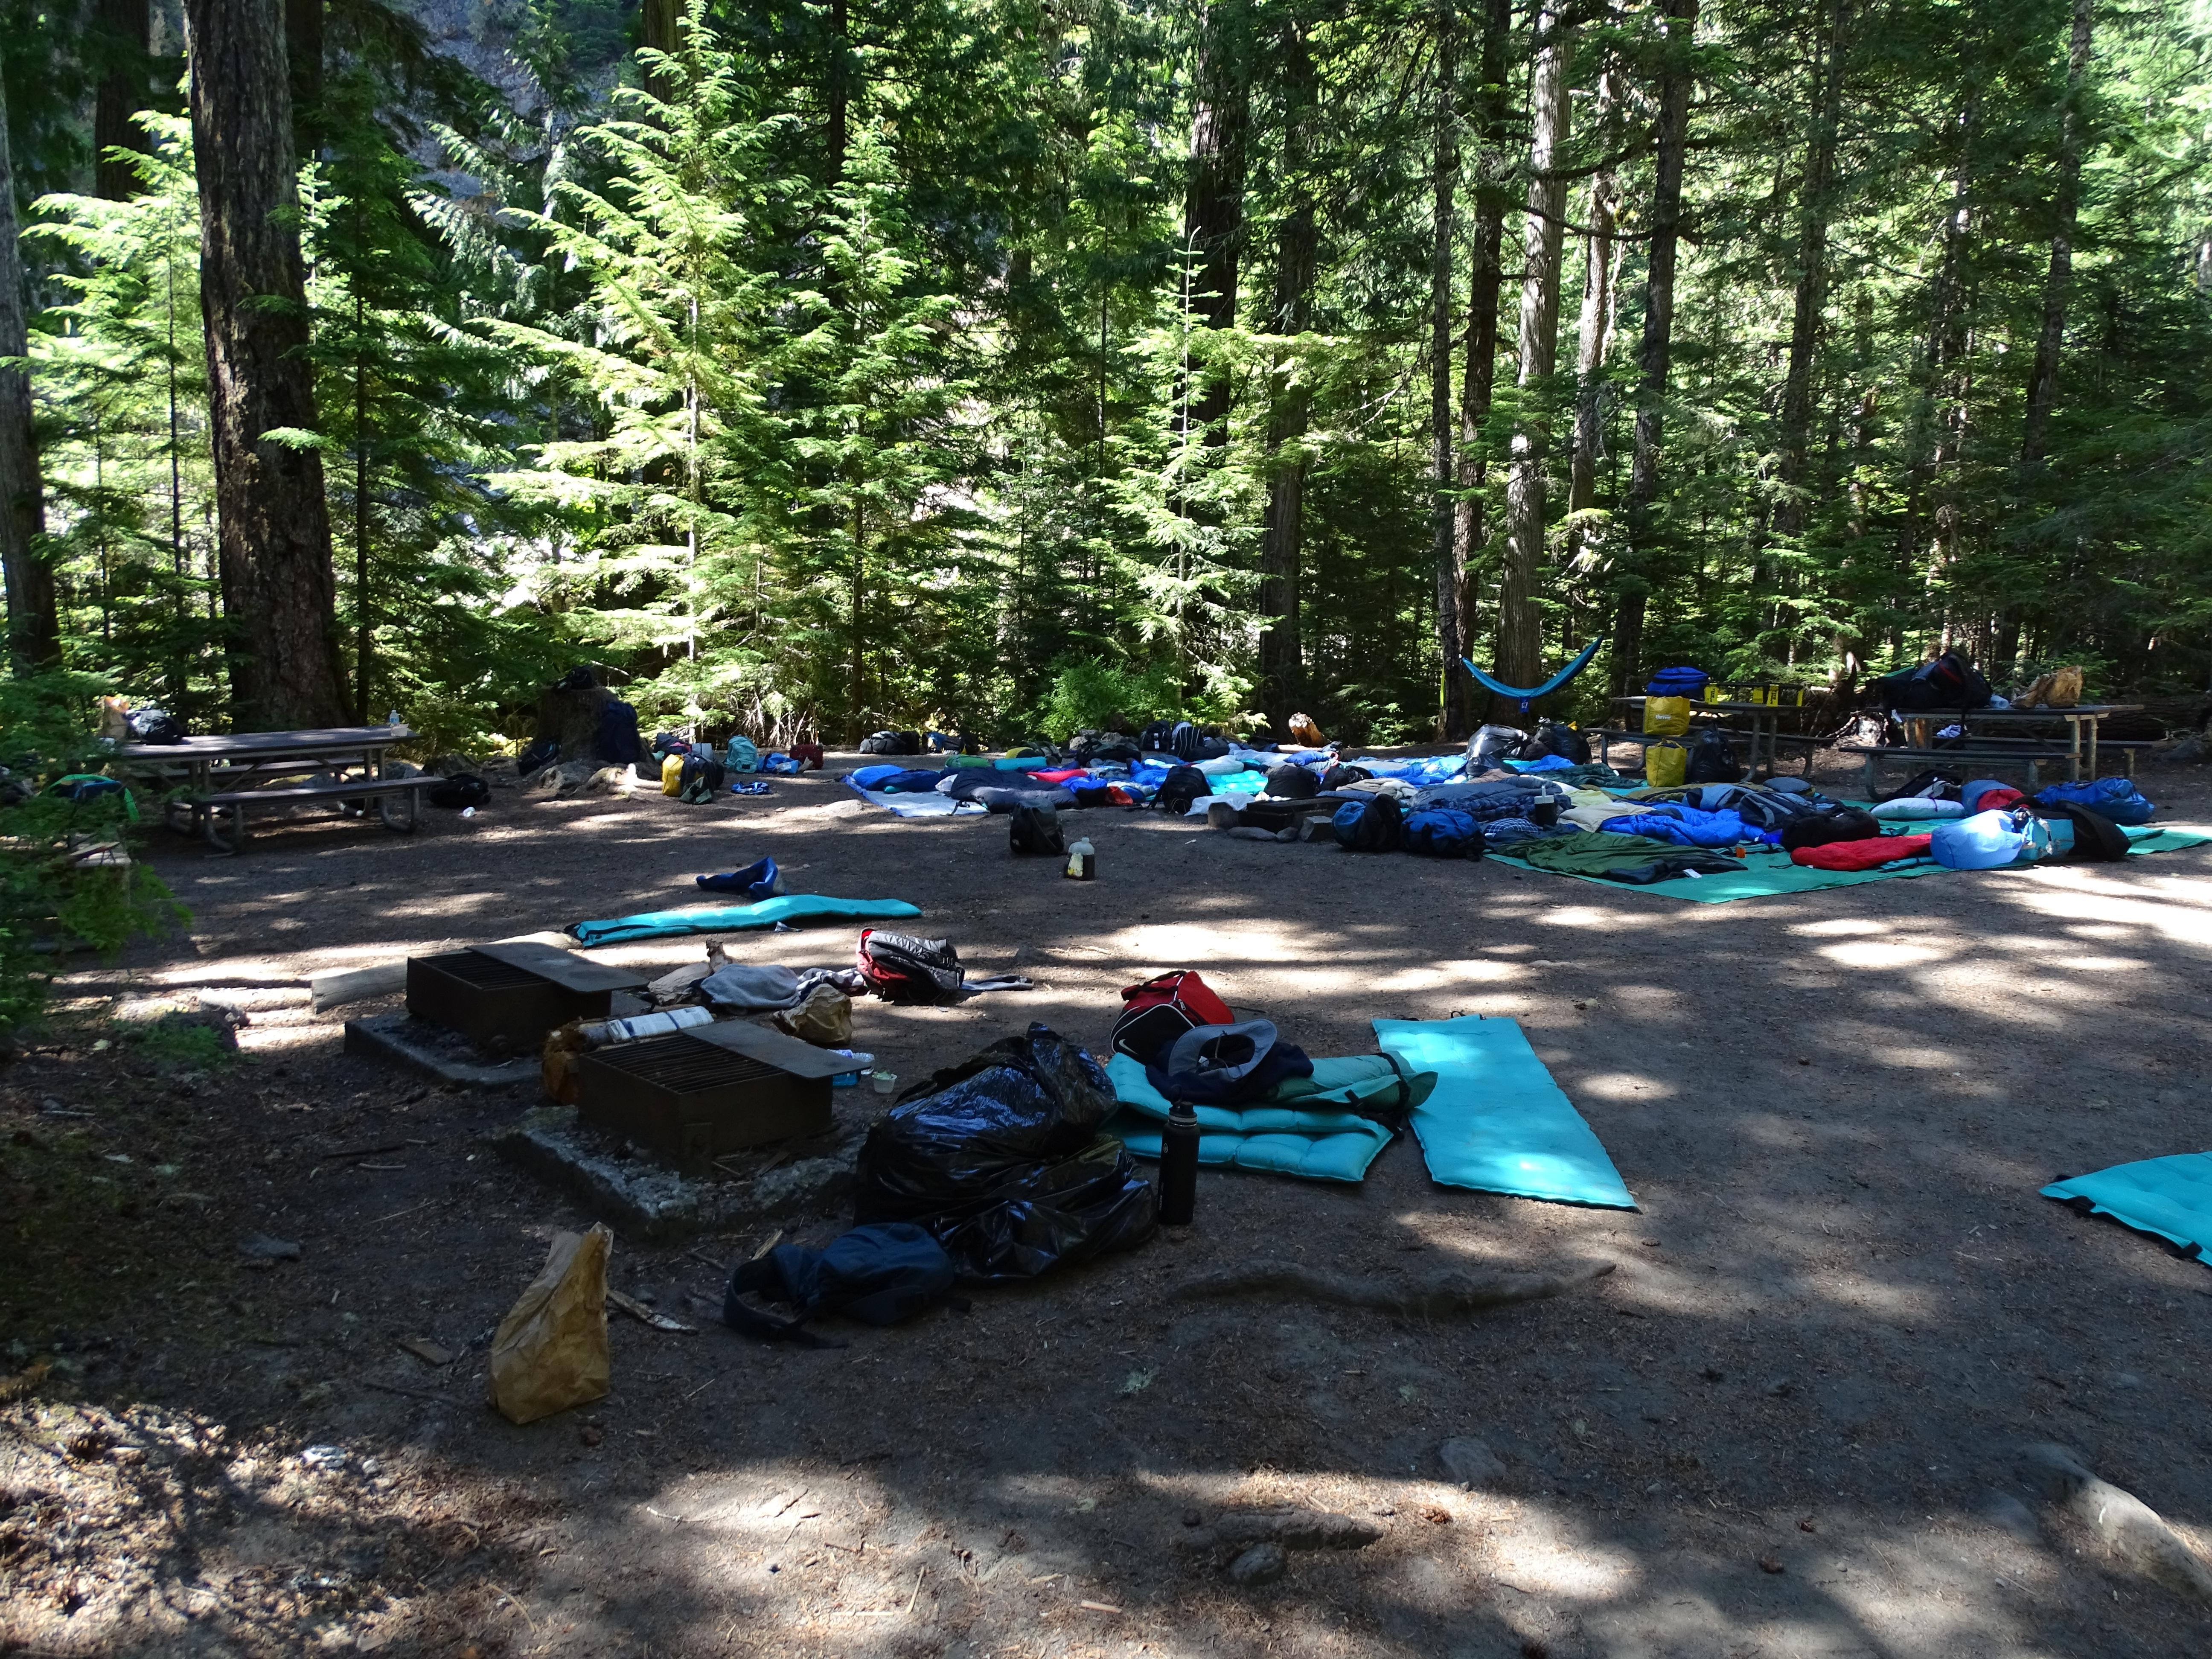 A large open space with scattered sleeping bags and camp materials